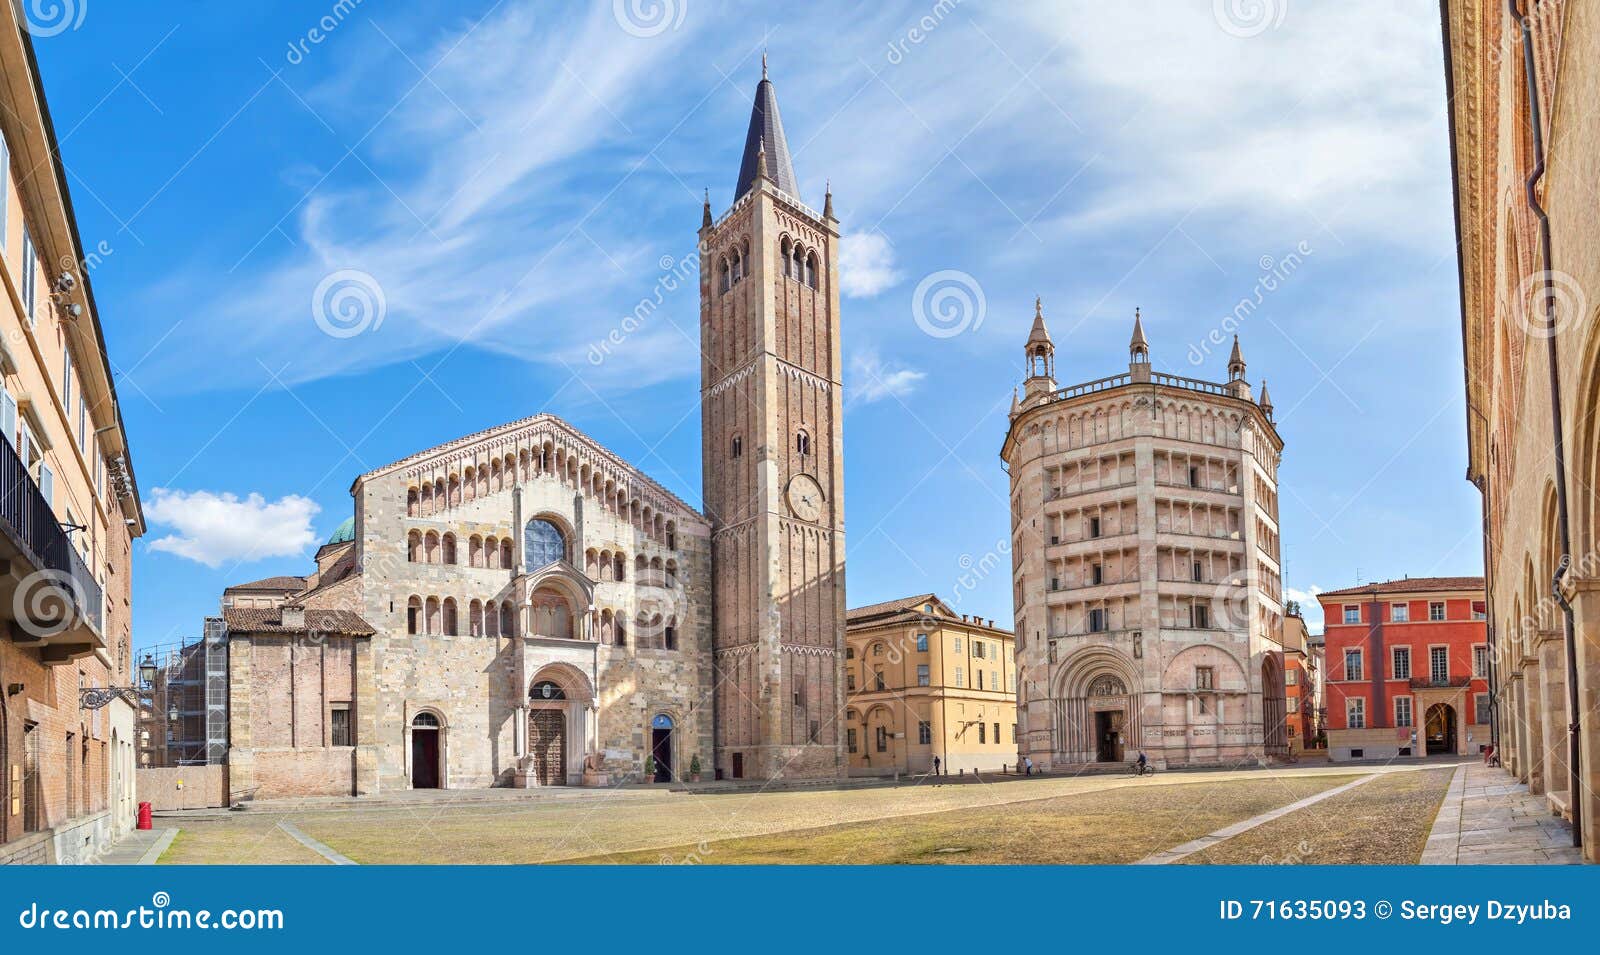 panorama of piazza duomo in parma